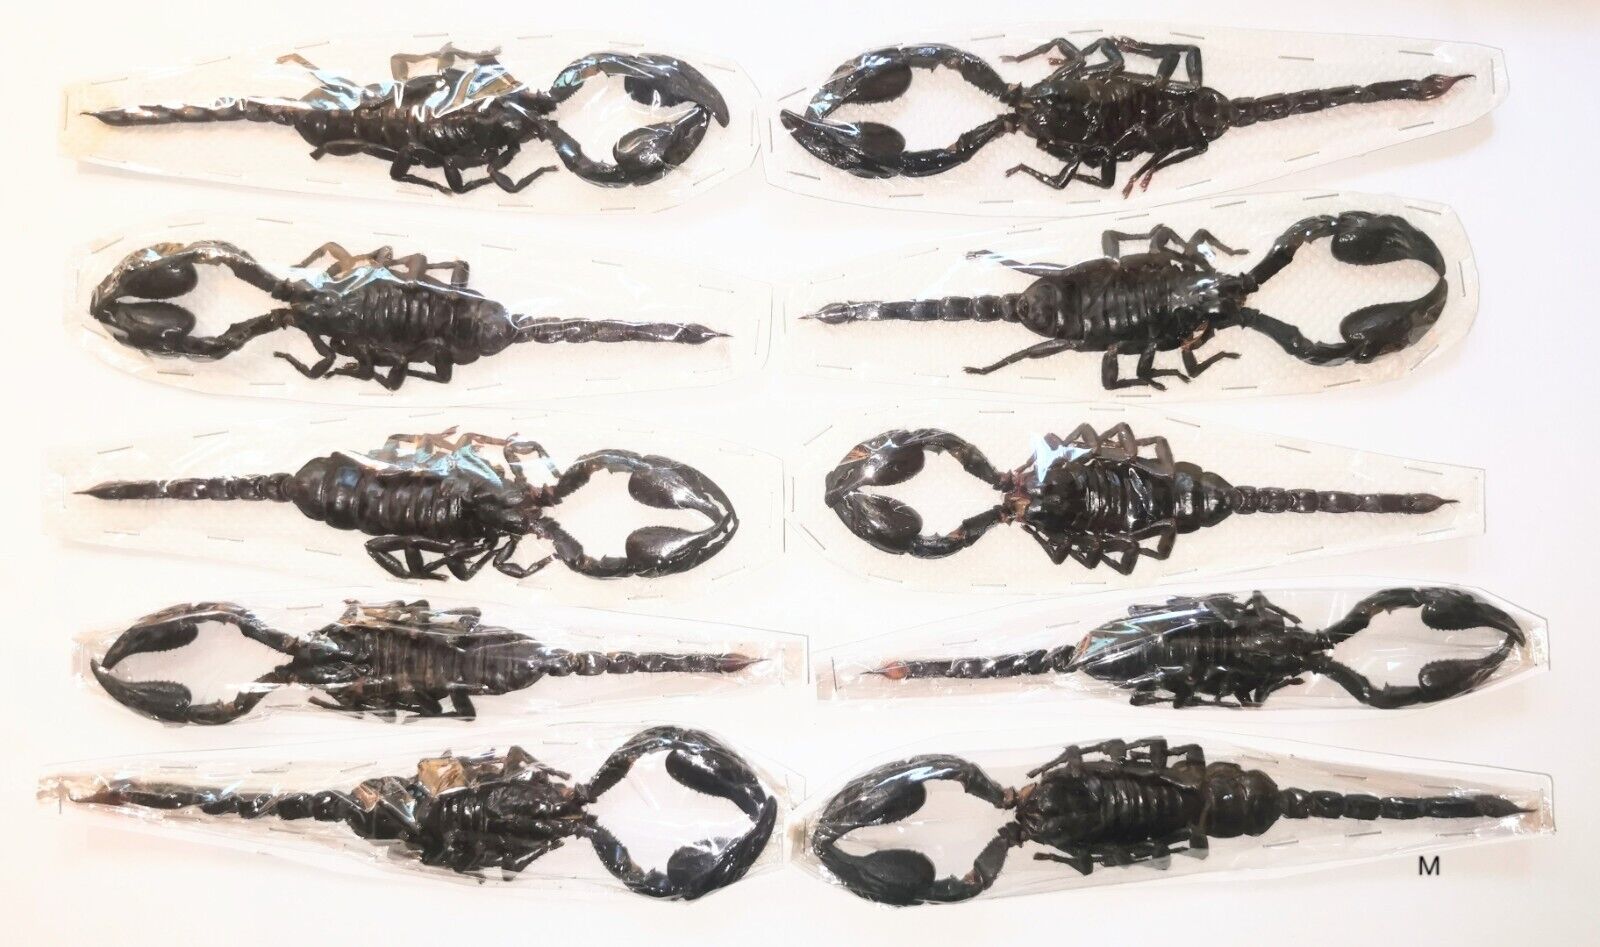 Heterometrus spinifer 12cm+ 10pcs A1/A1- from MALAYSIA - MED. SCORPION  #0580-10